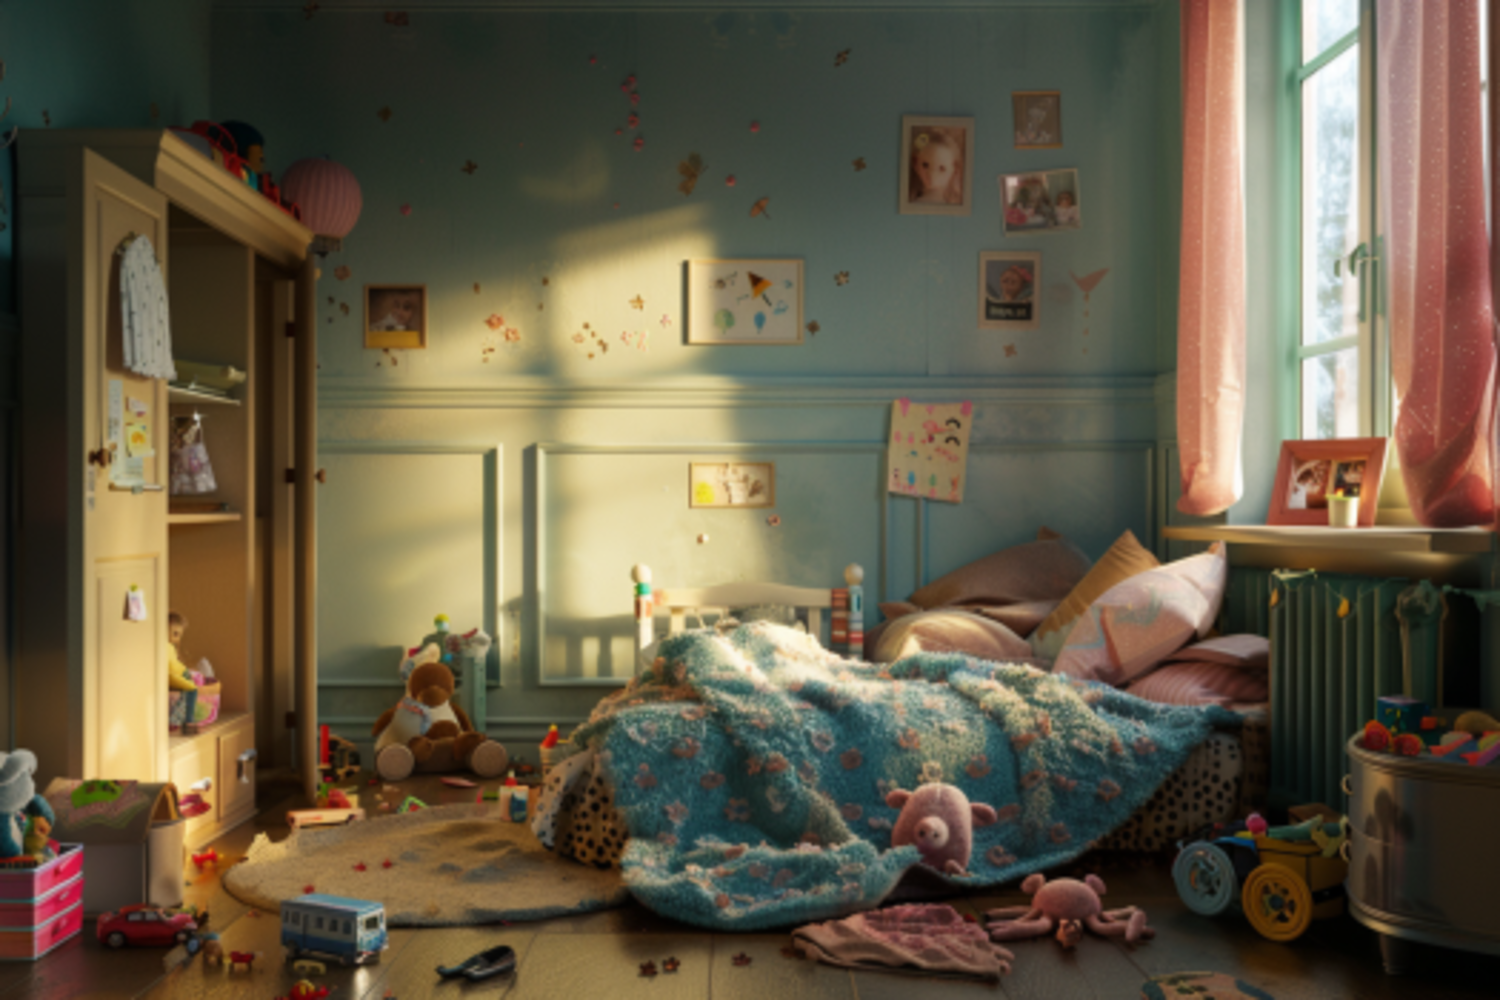 A little girl's messy bedroom | Source: Midjourney